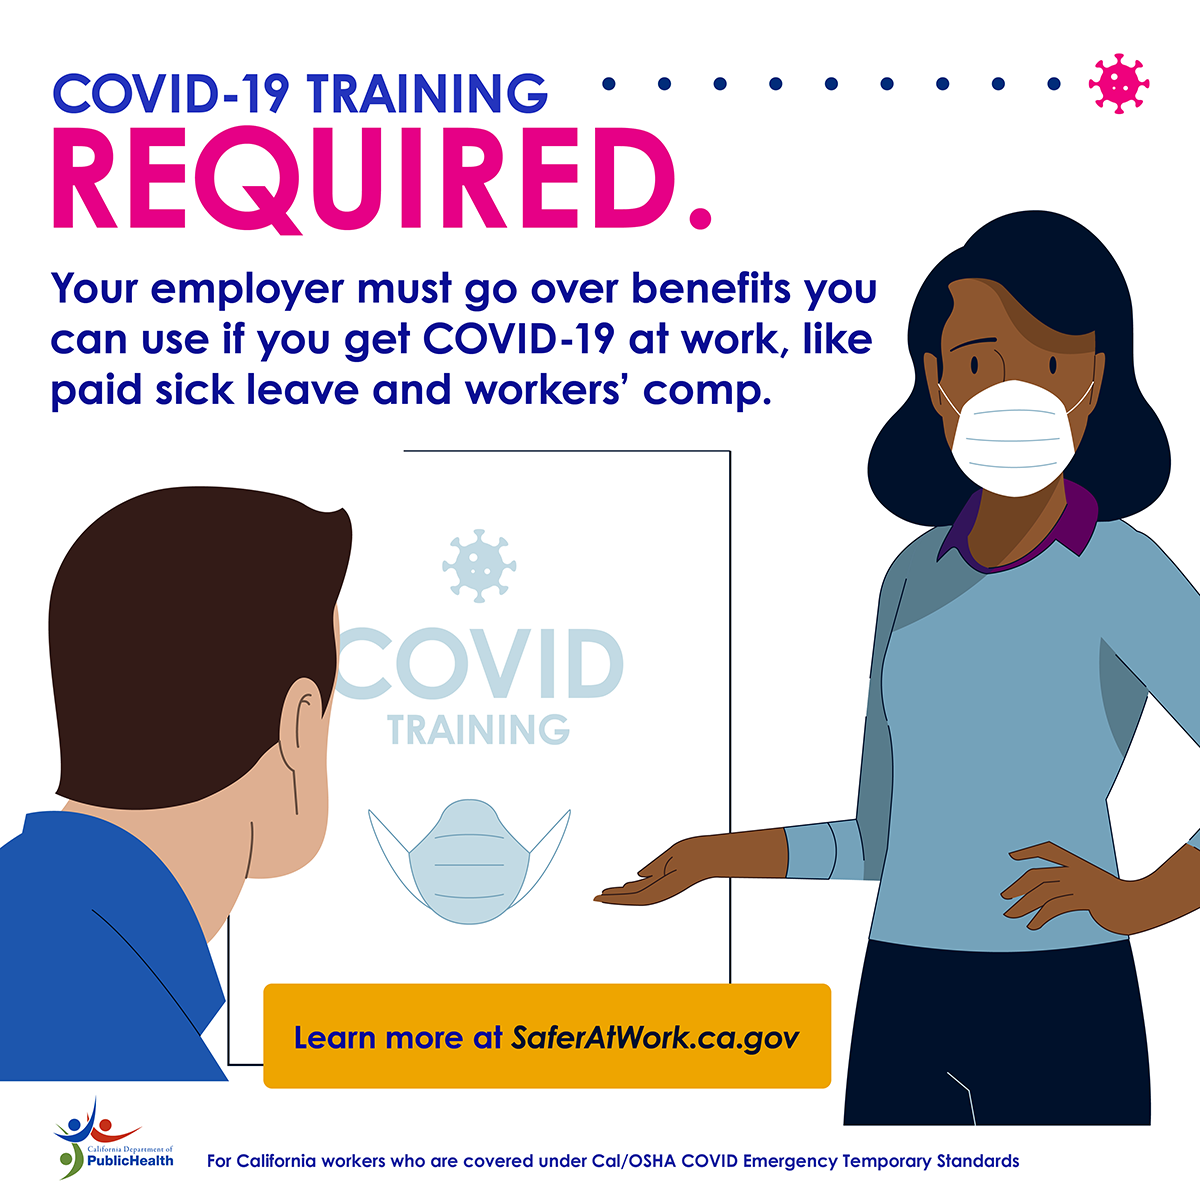 COVID-19 training required. Your employer must go over benefits you can use if you get OVID-19 at work, like paid sick leave and workers' comp